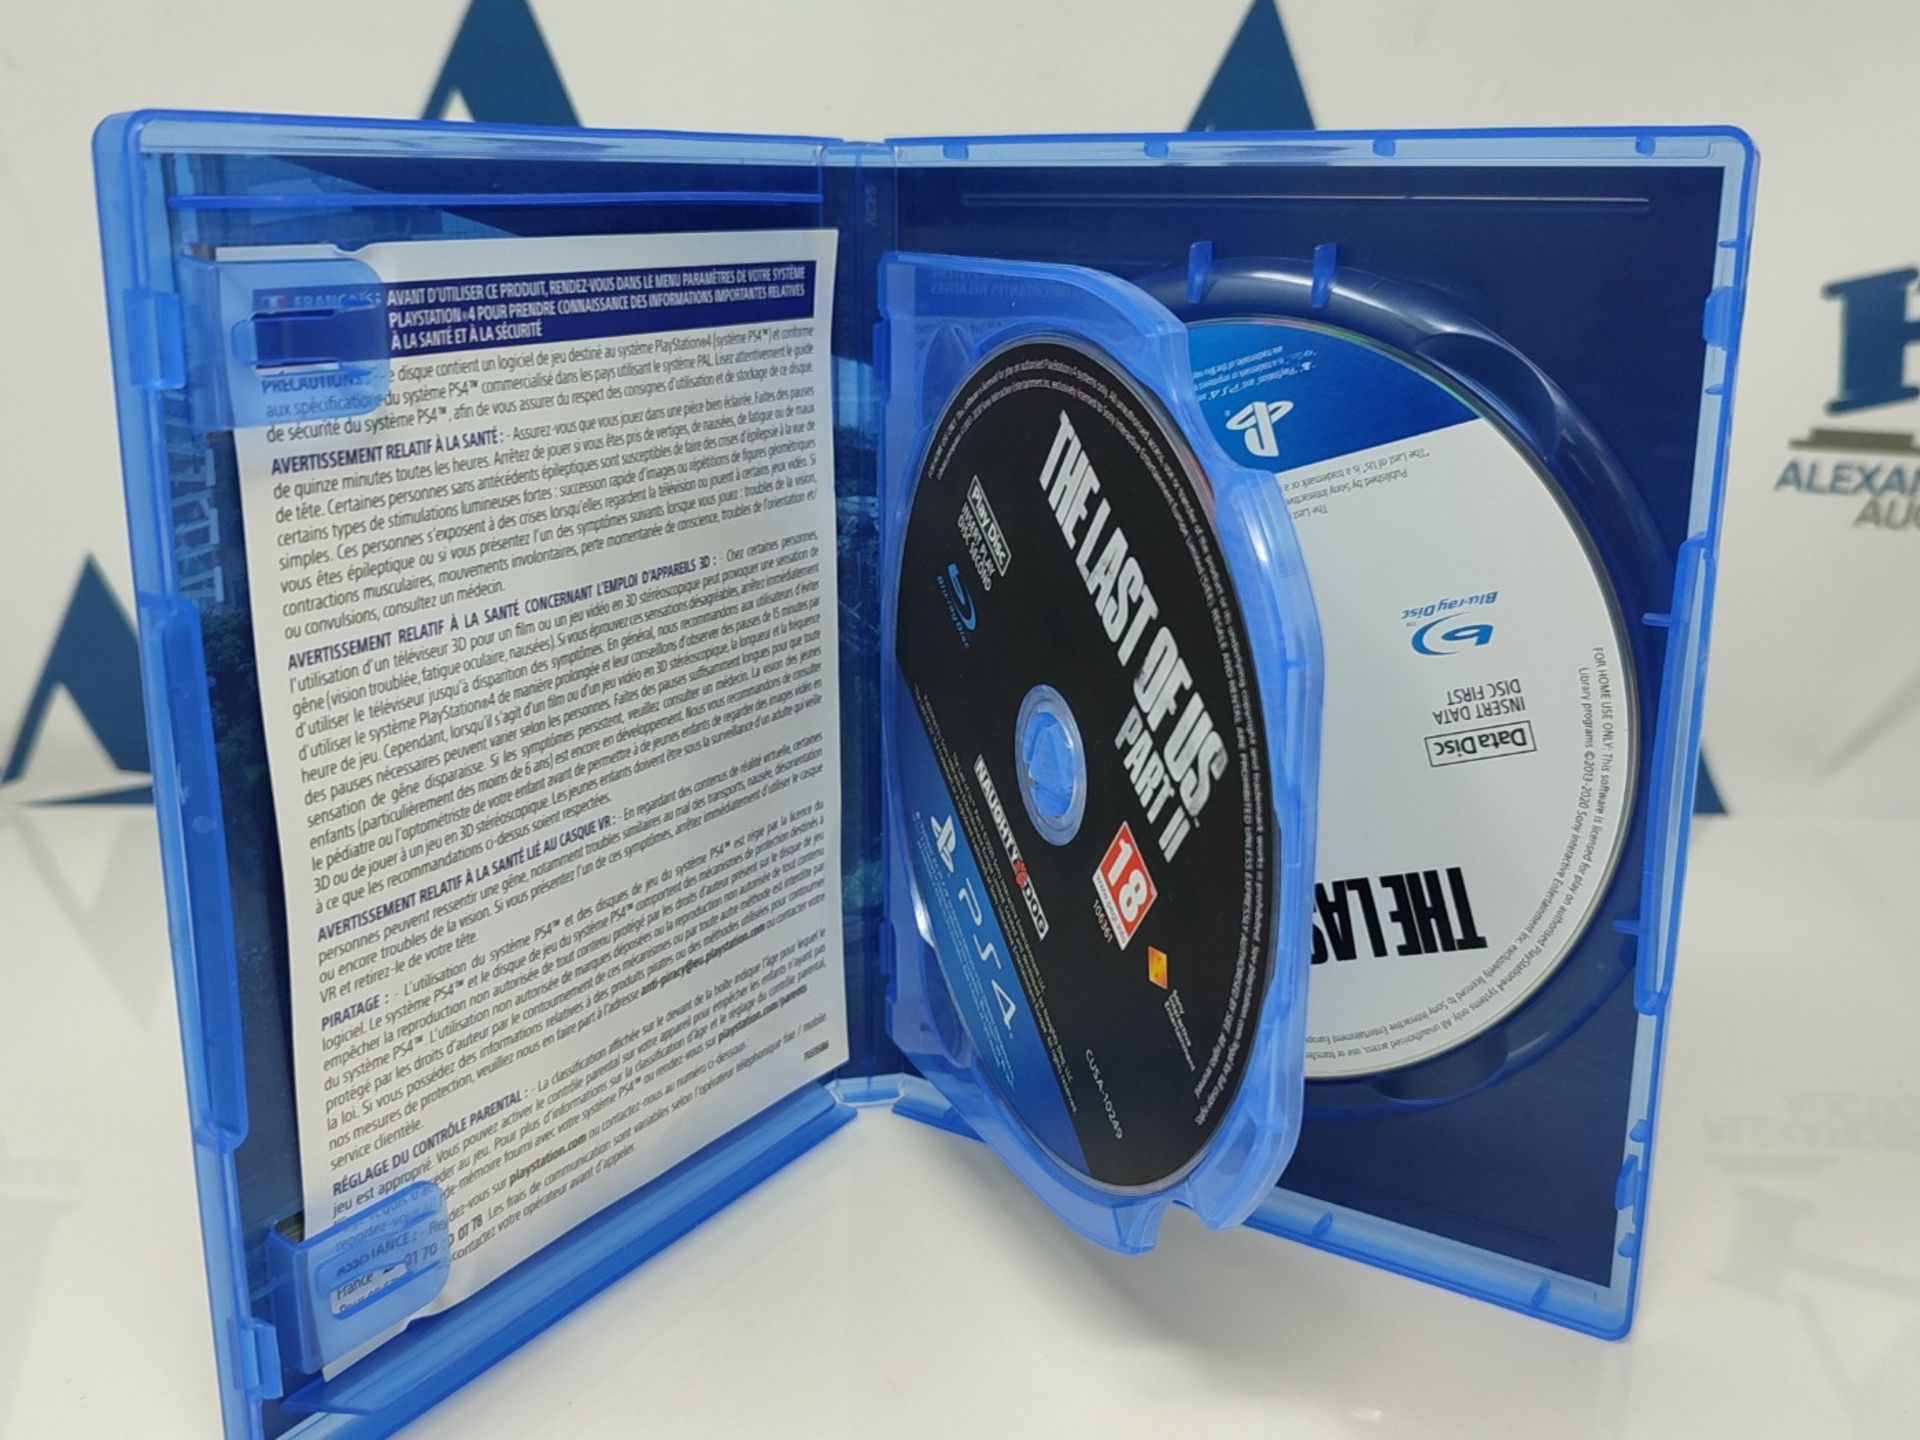 Sony, The Last Of Us PS4, Standard Edition, 1 Player, Physical Version with CD, In Fre - Image 3 of 3